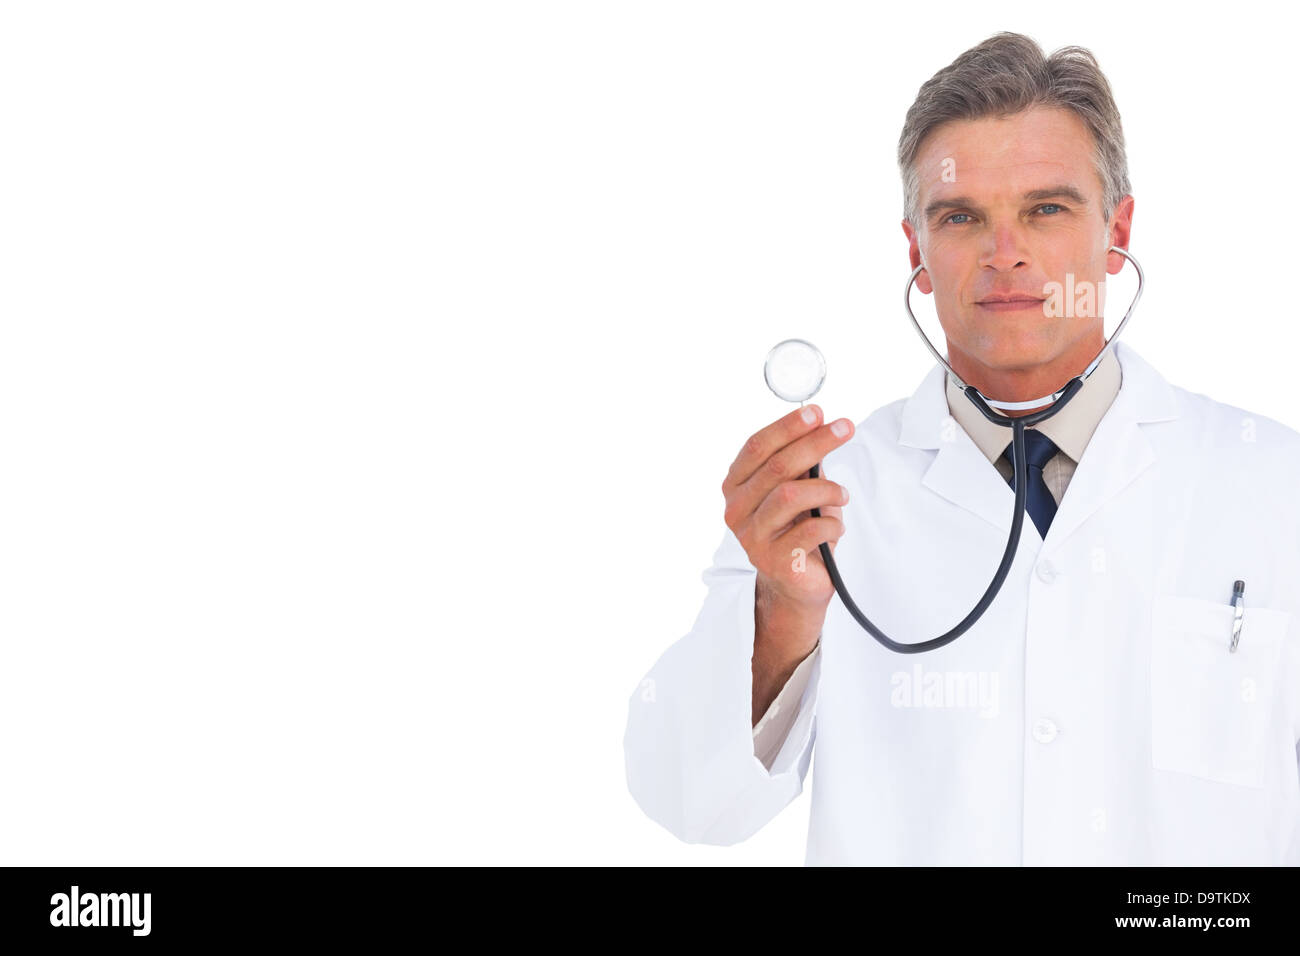 Serious doctor holding stethoscope Banque D'Images